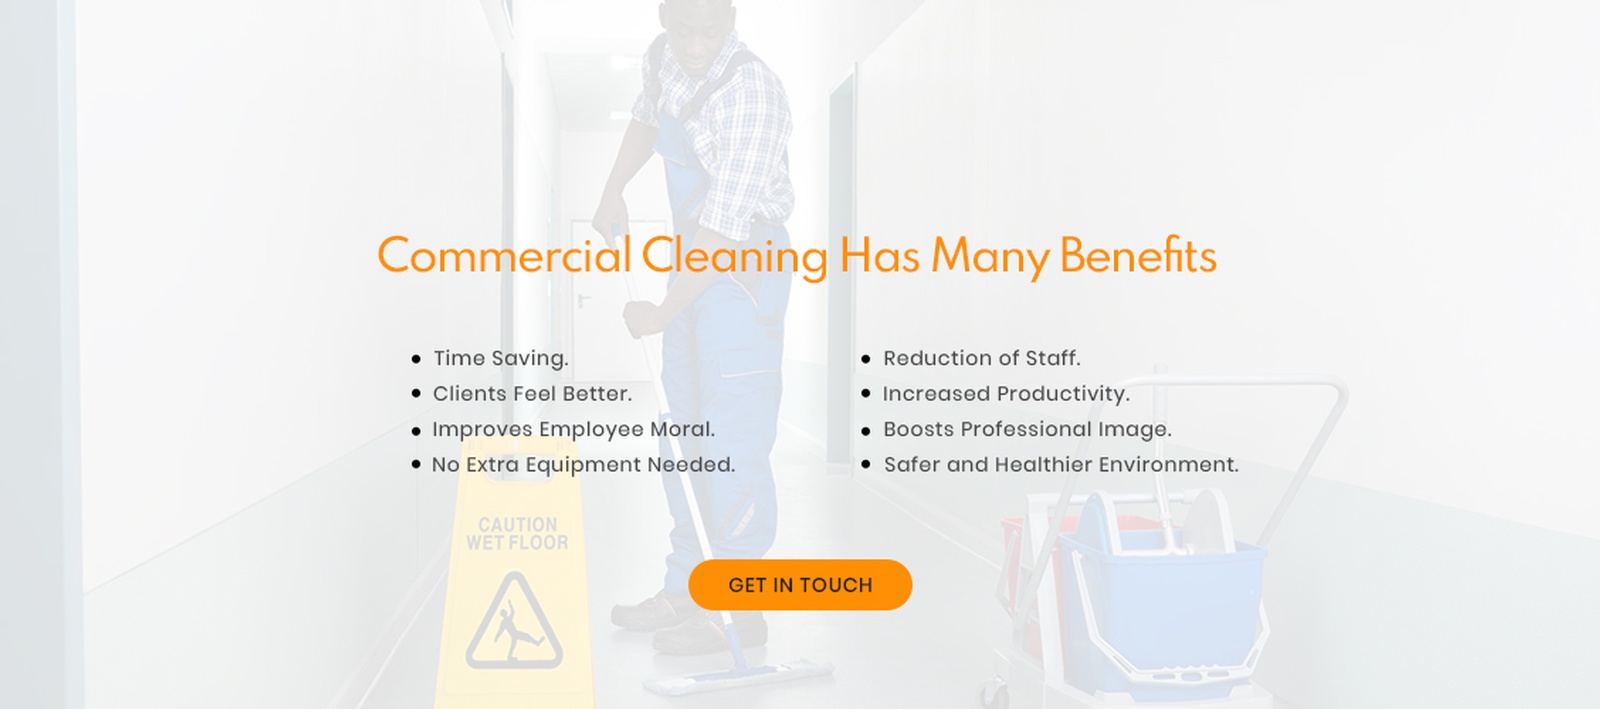 Commercial Cleaning has many benefits - Commercial Cleaners in Boston